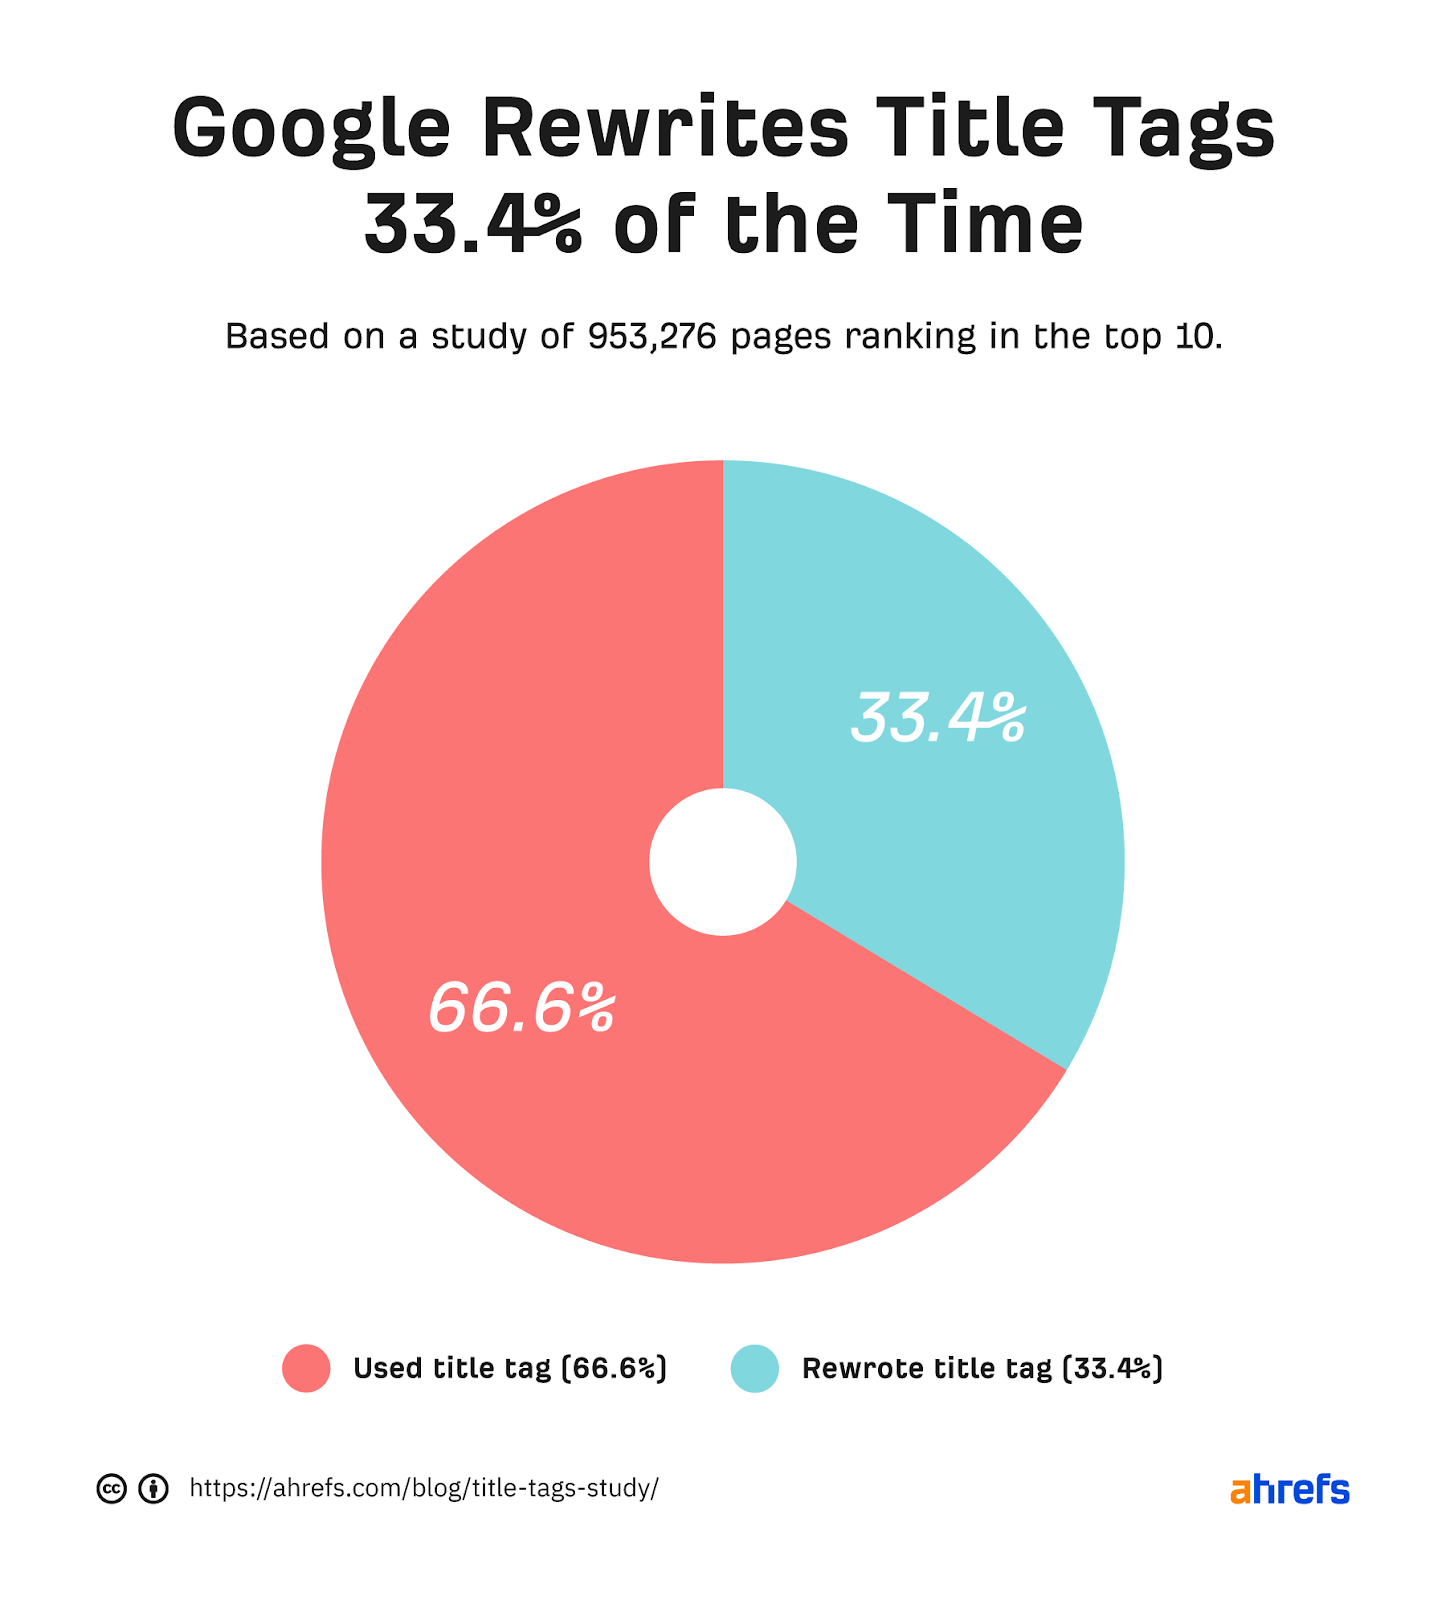 Pie chart showing Google uses title tags 66.6% of the time, rewrites them 33.4% of the time